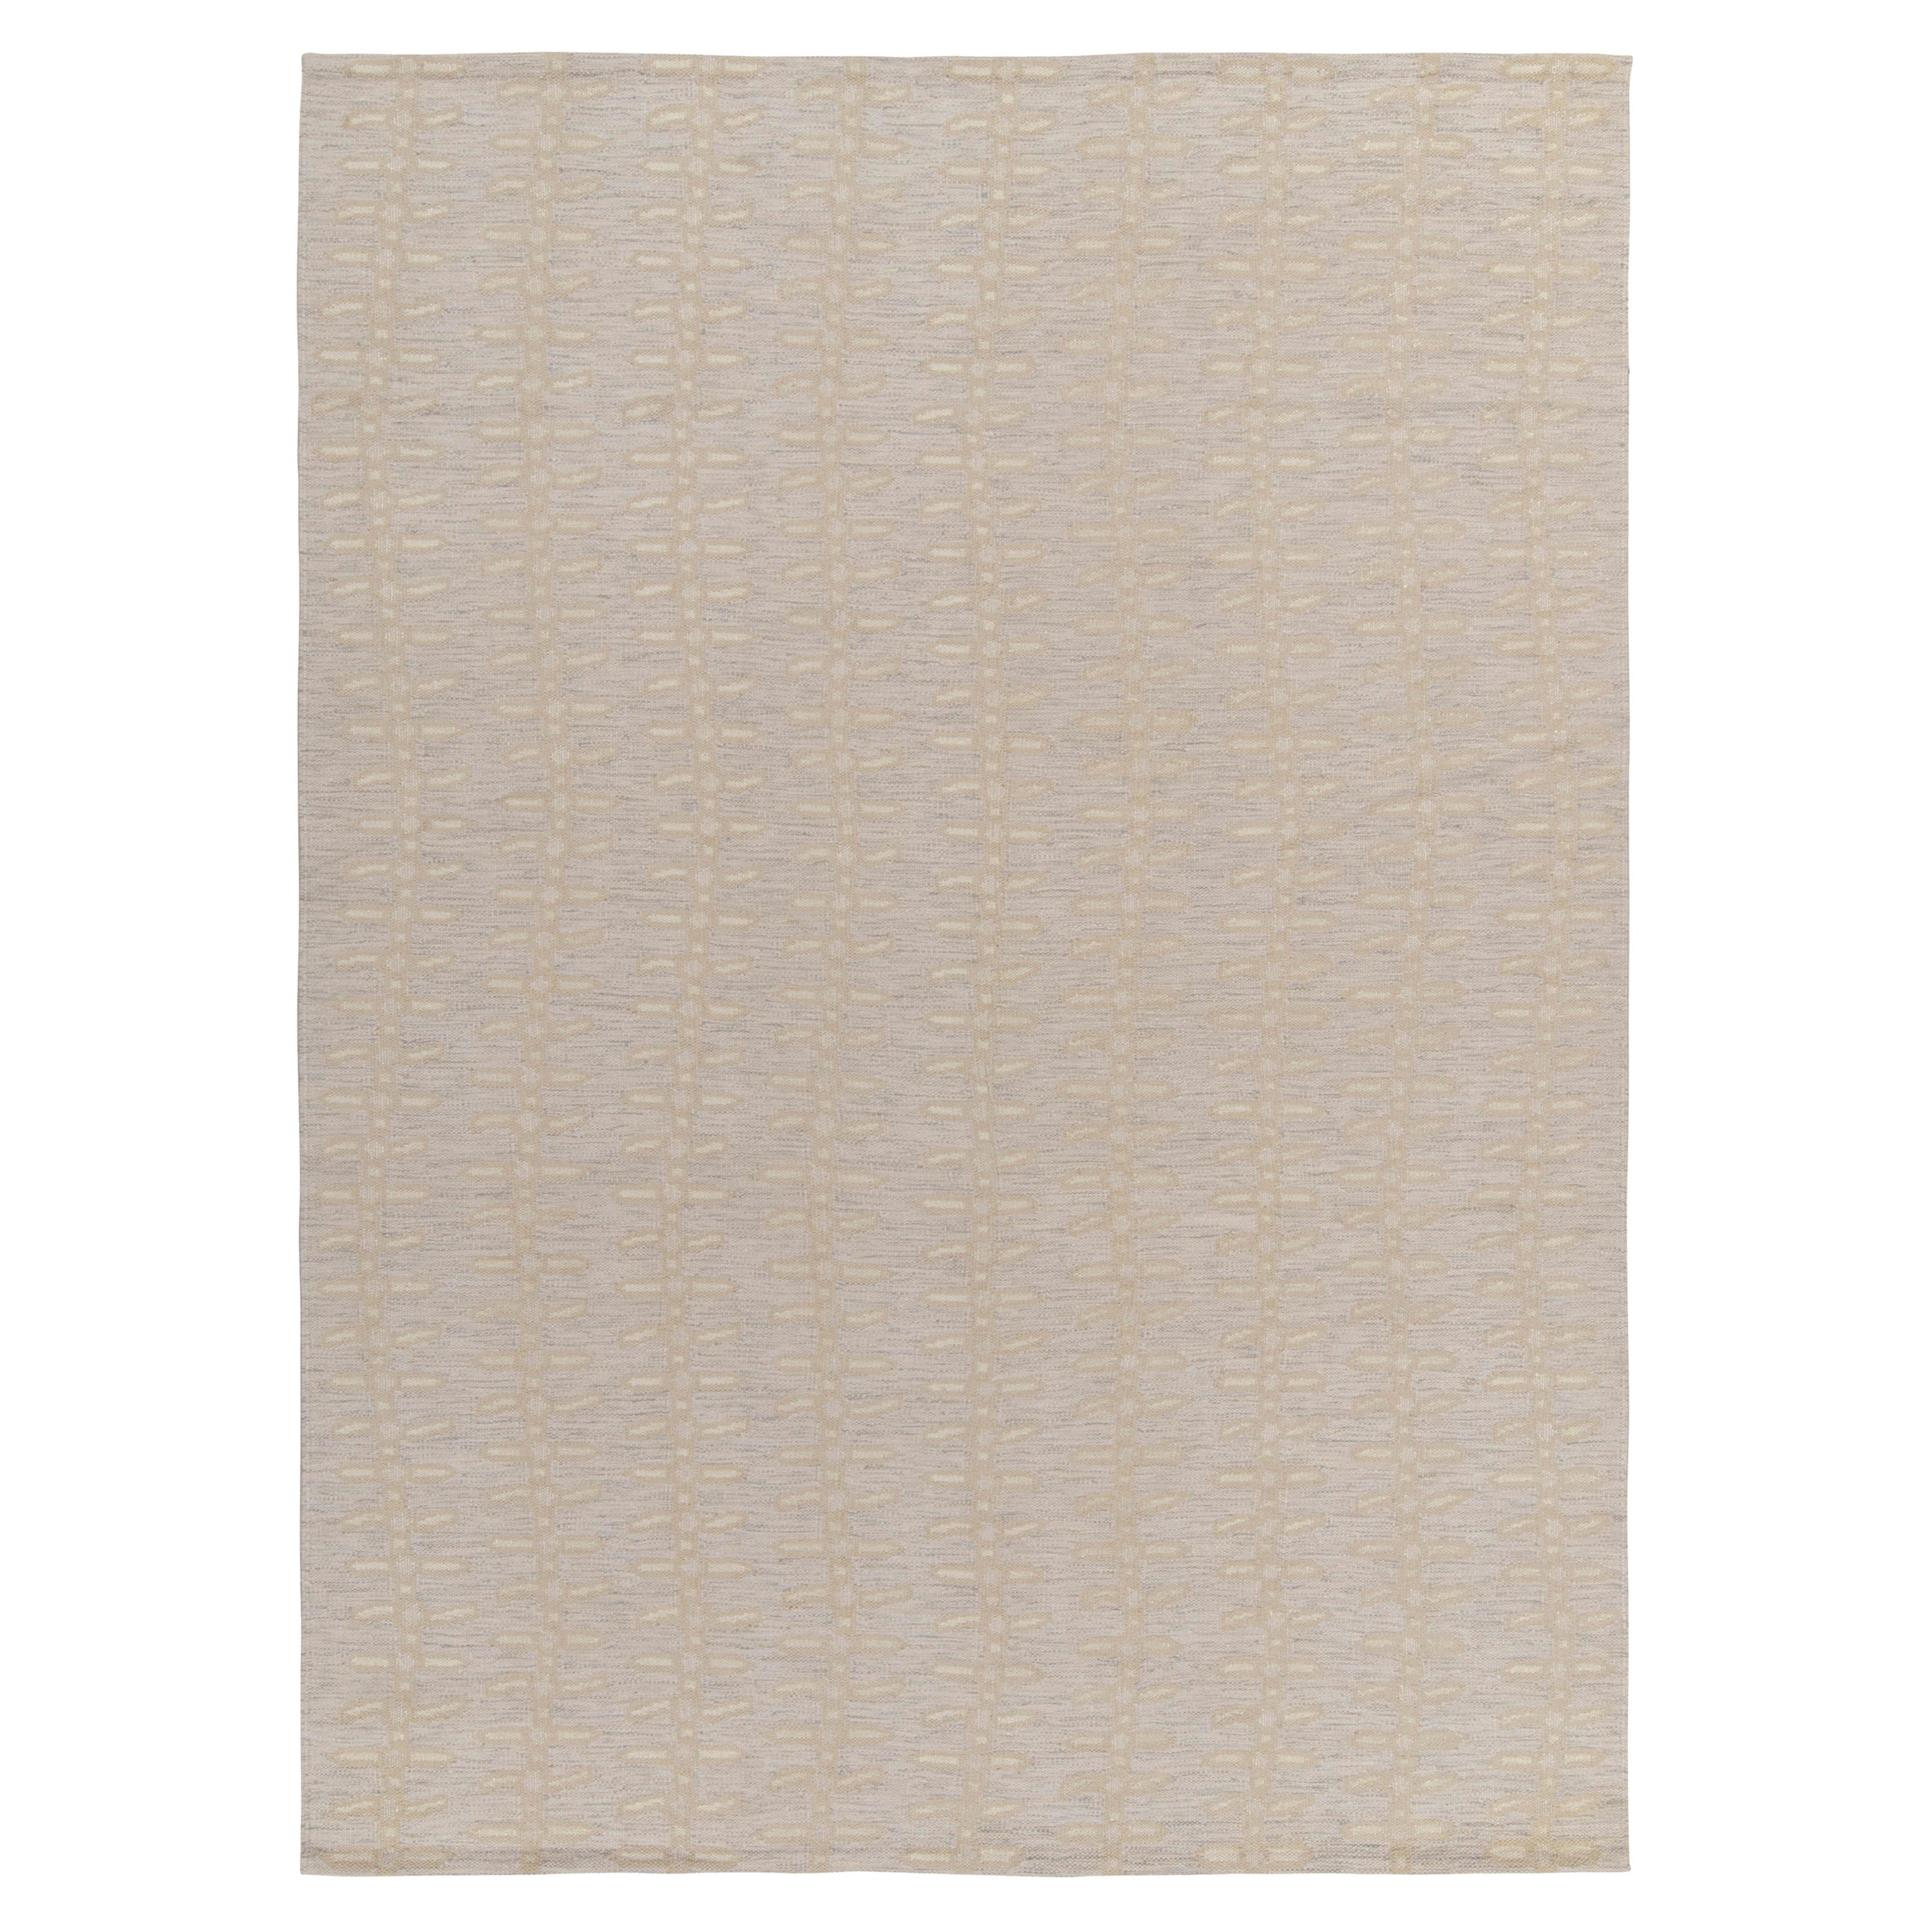 Rug & Kilim’s Scandinavian Style Kilim in Off-White, Grey and Beige Patterns For Sale